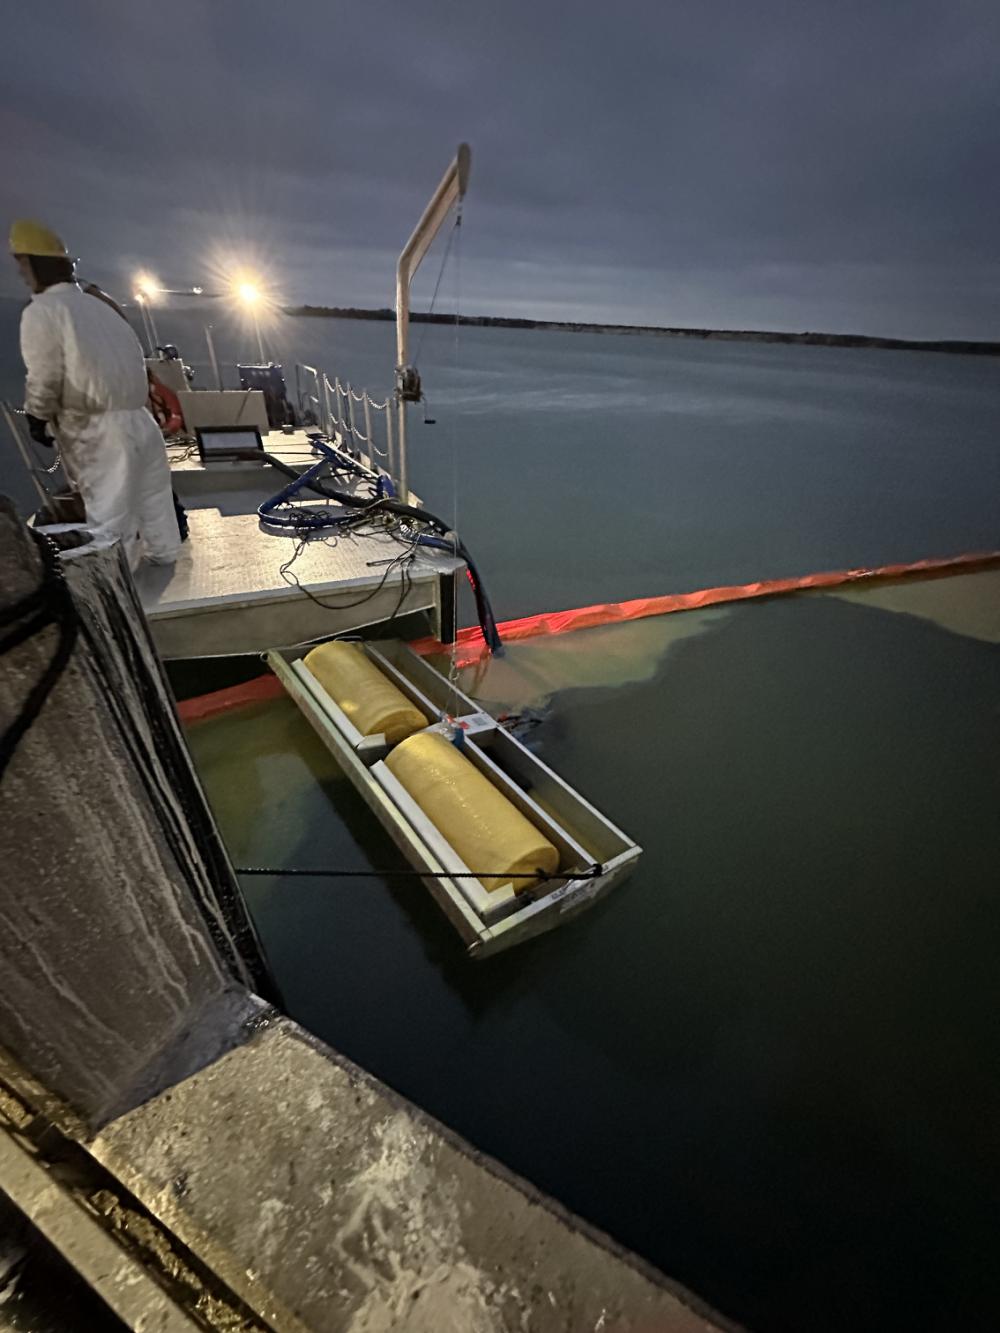 Pollution responders use oil skimmers to collect oil in the La Quinta Channel in Corpus Christi Bay, Texas, Dec. 25, 2022. Coast Guard Sector Corpus Christi personnel estimated up to 3,800 gallons of light crude oil entered the water from a cracked pipeline near the Flint Hills Ingleside facility. (U.S. Coast Guard photo by Petty Officer 2nd Class Stephen McConnell)